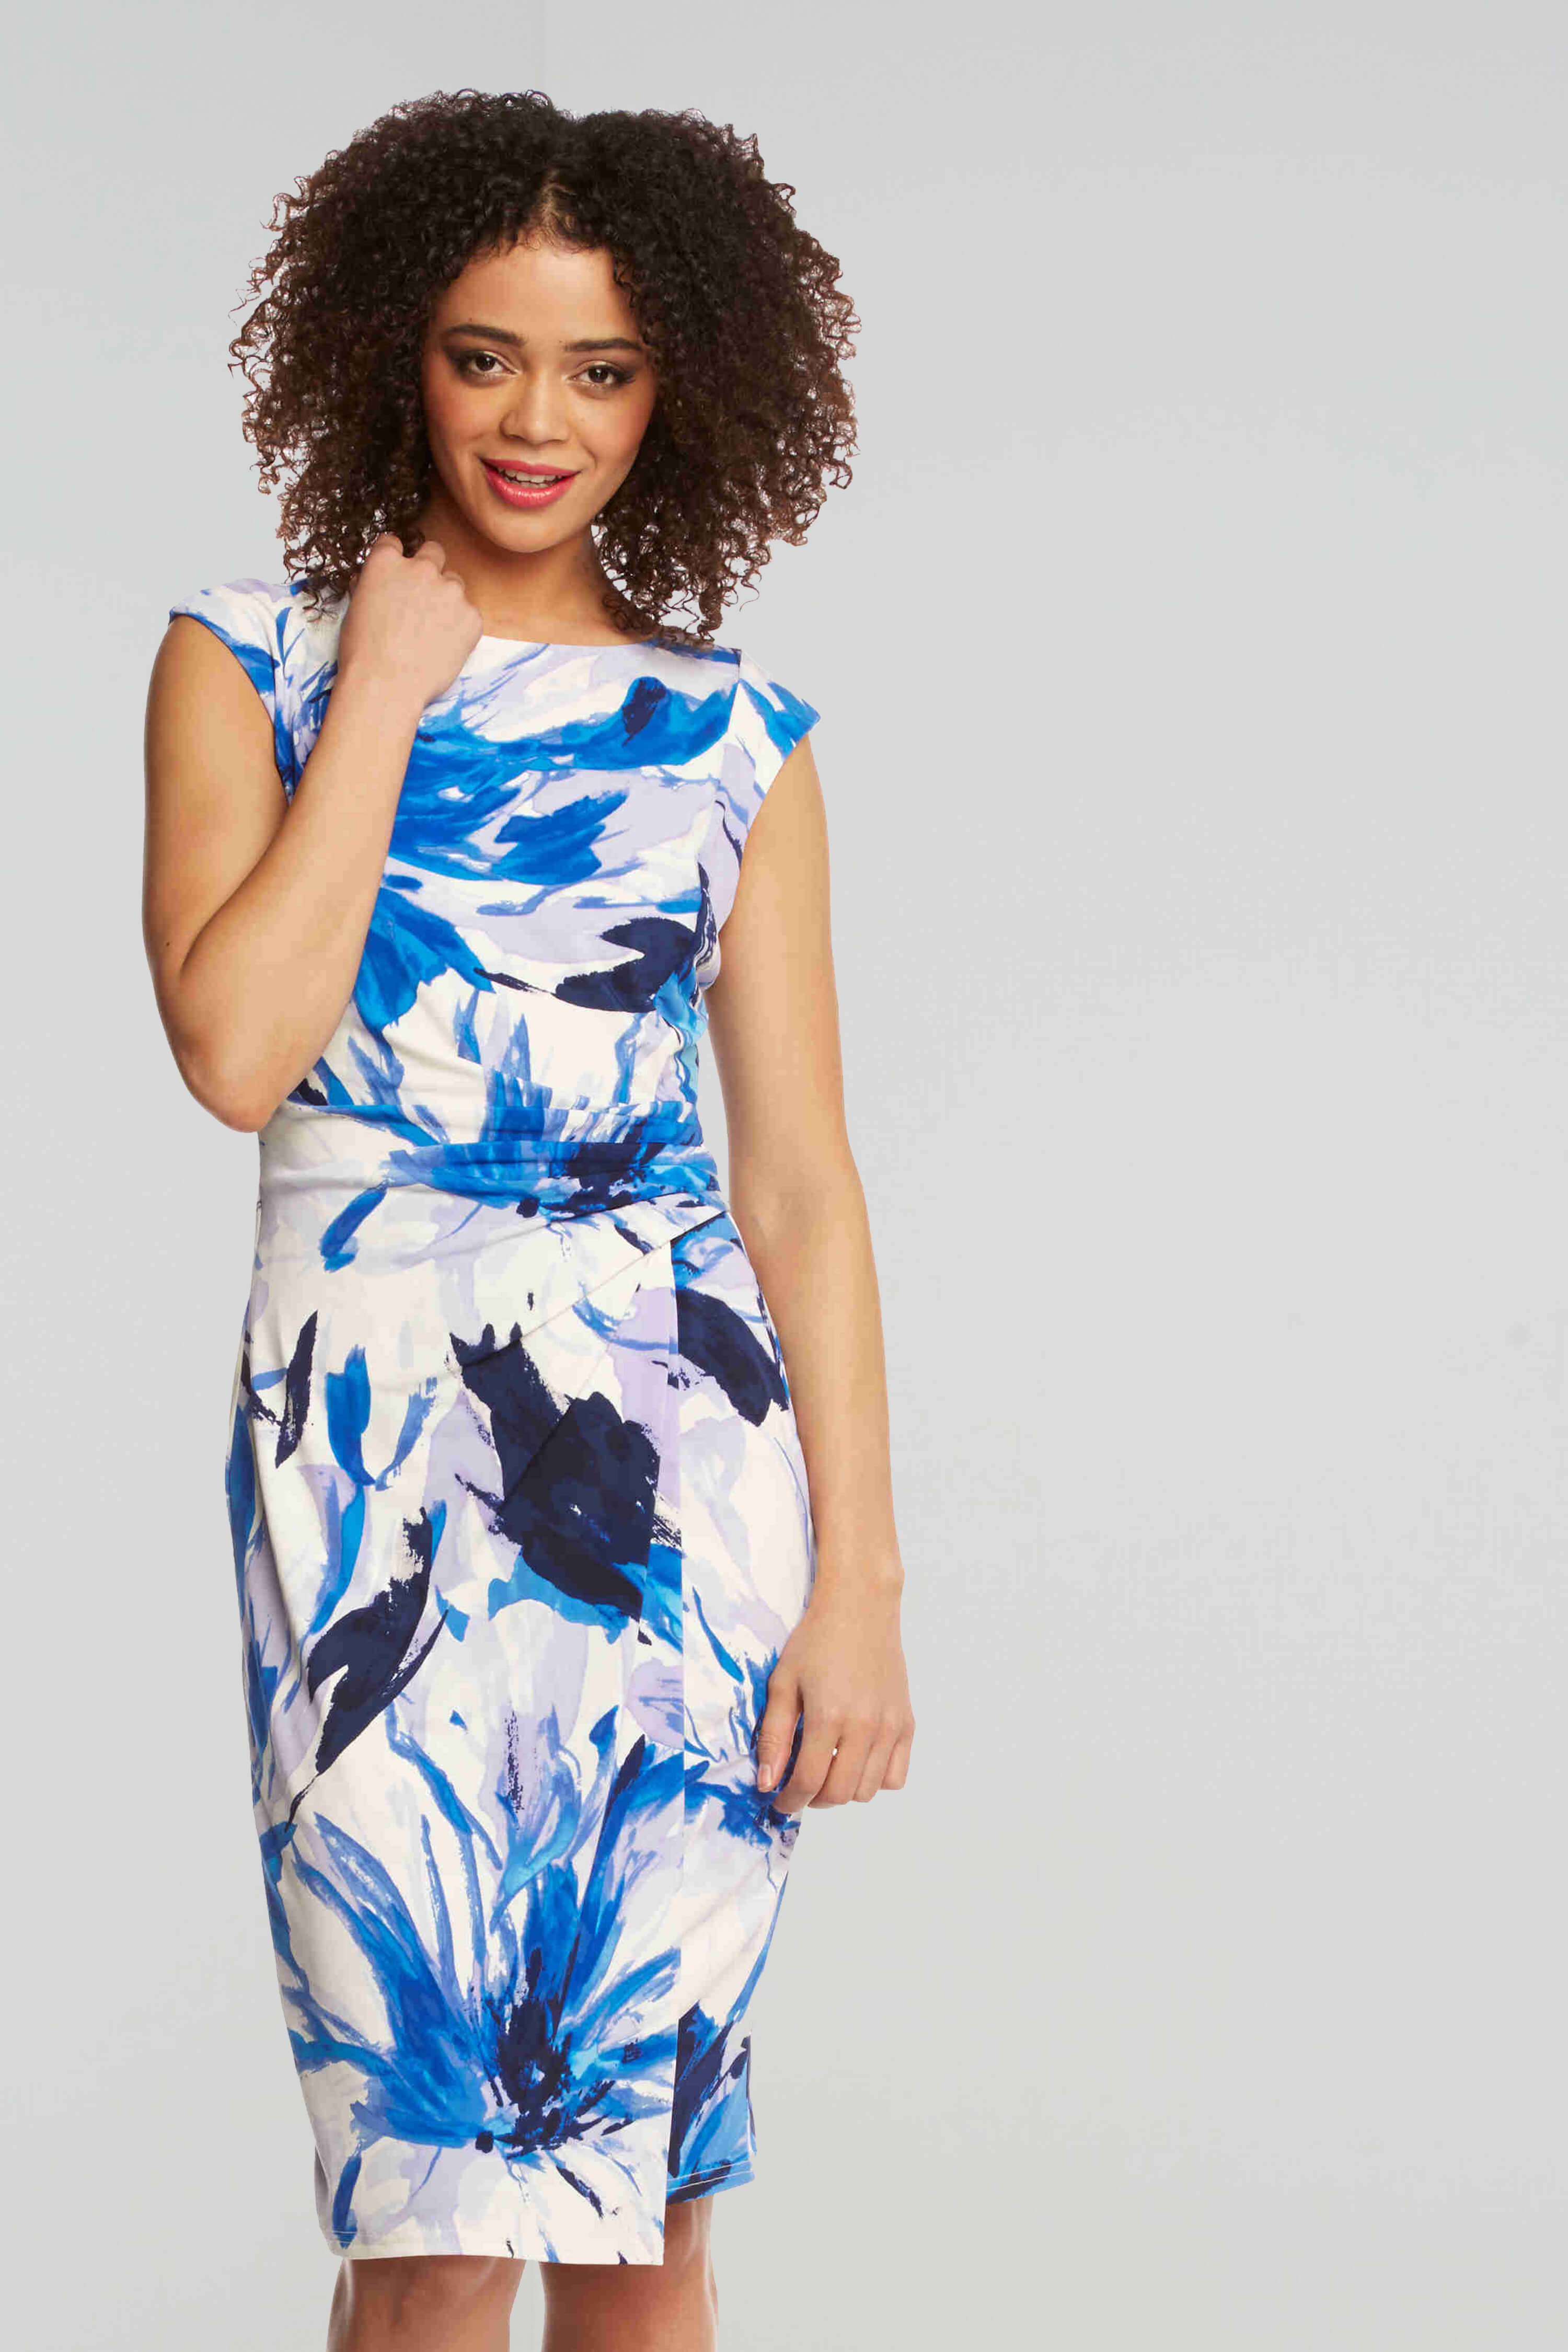 Royal Blue Abstract Underwater Floral Print Dress, Image 2 of 4